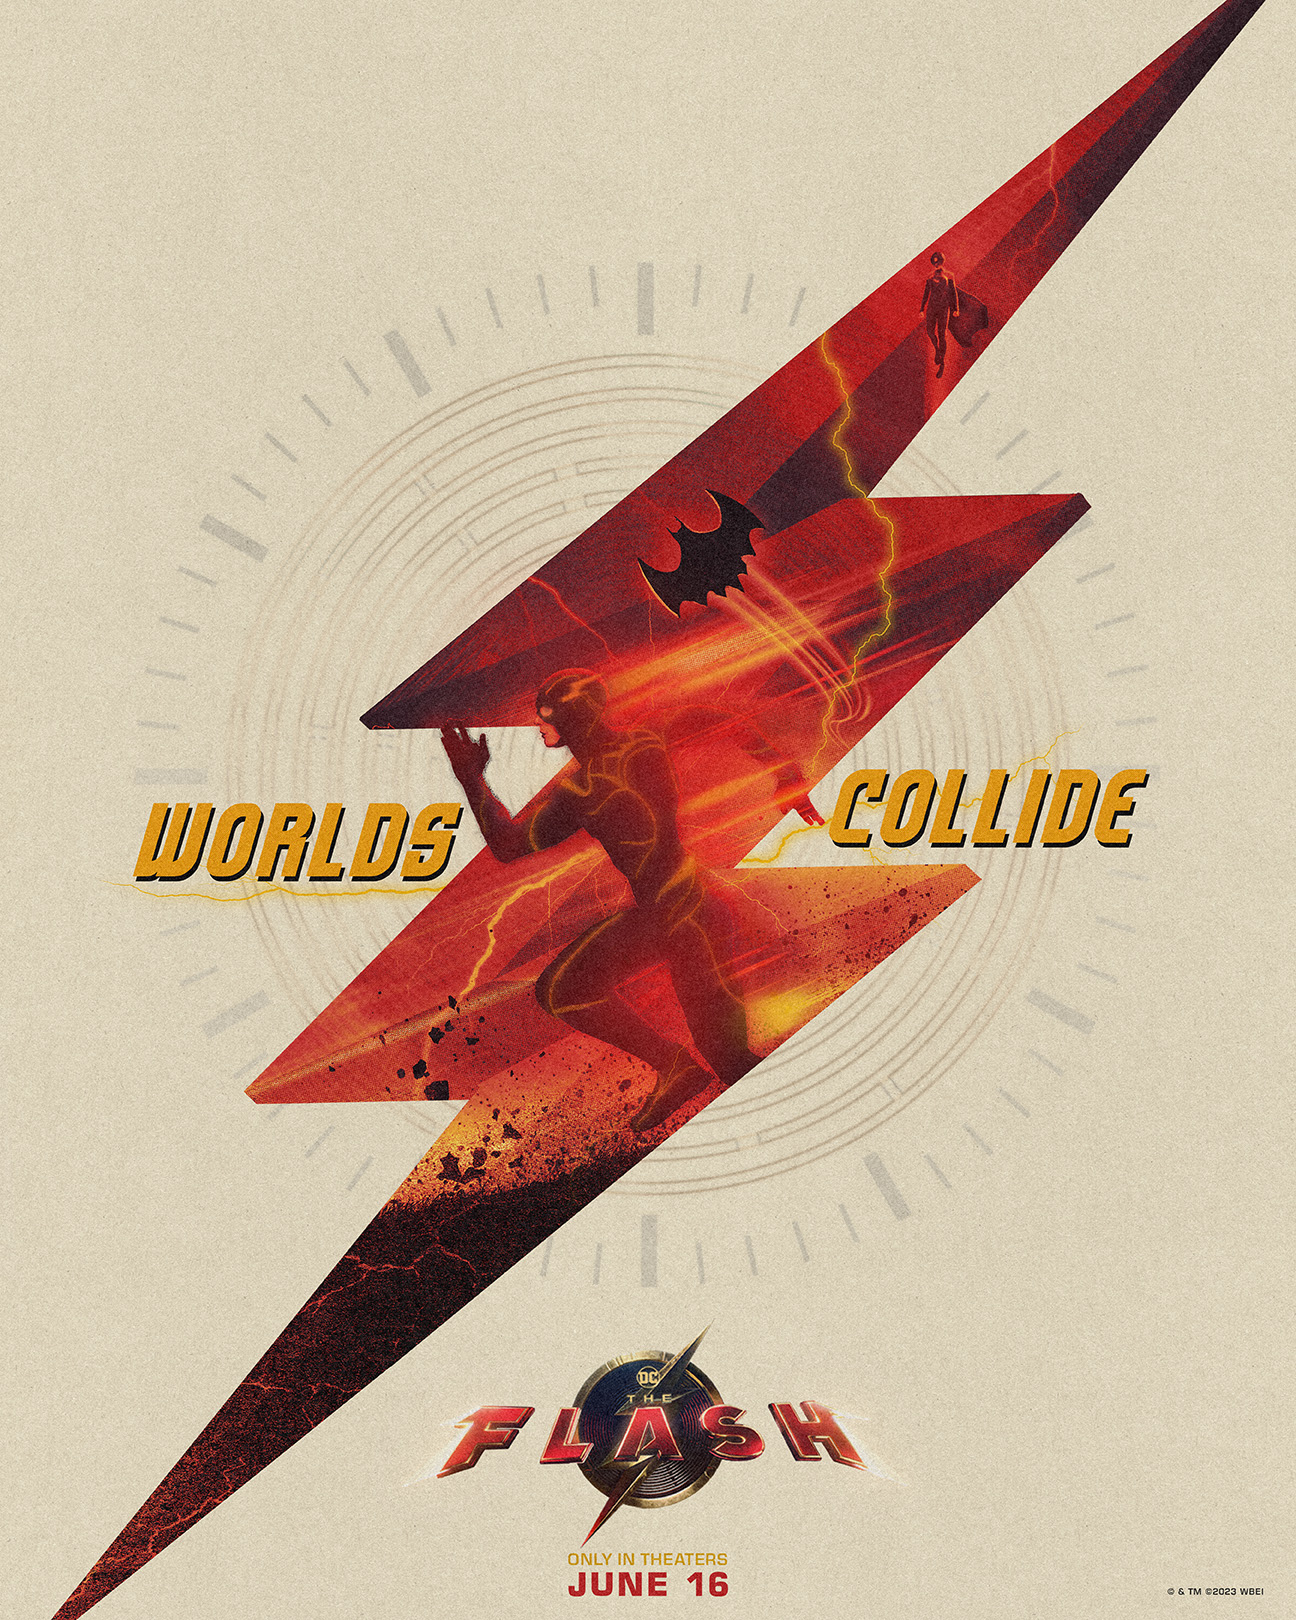 Artwork by Warner Bros Pictures – The Flash